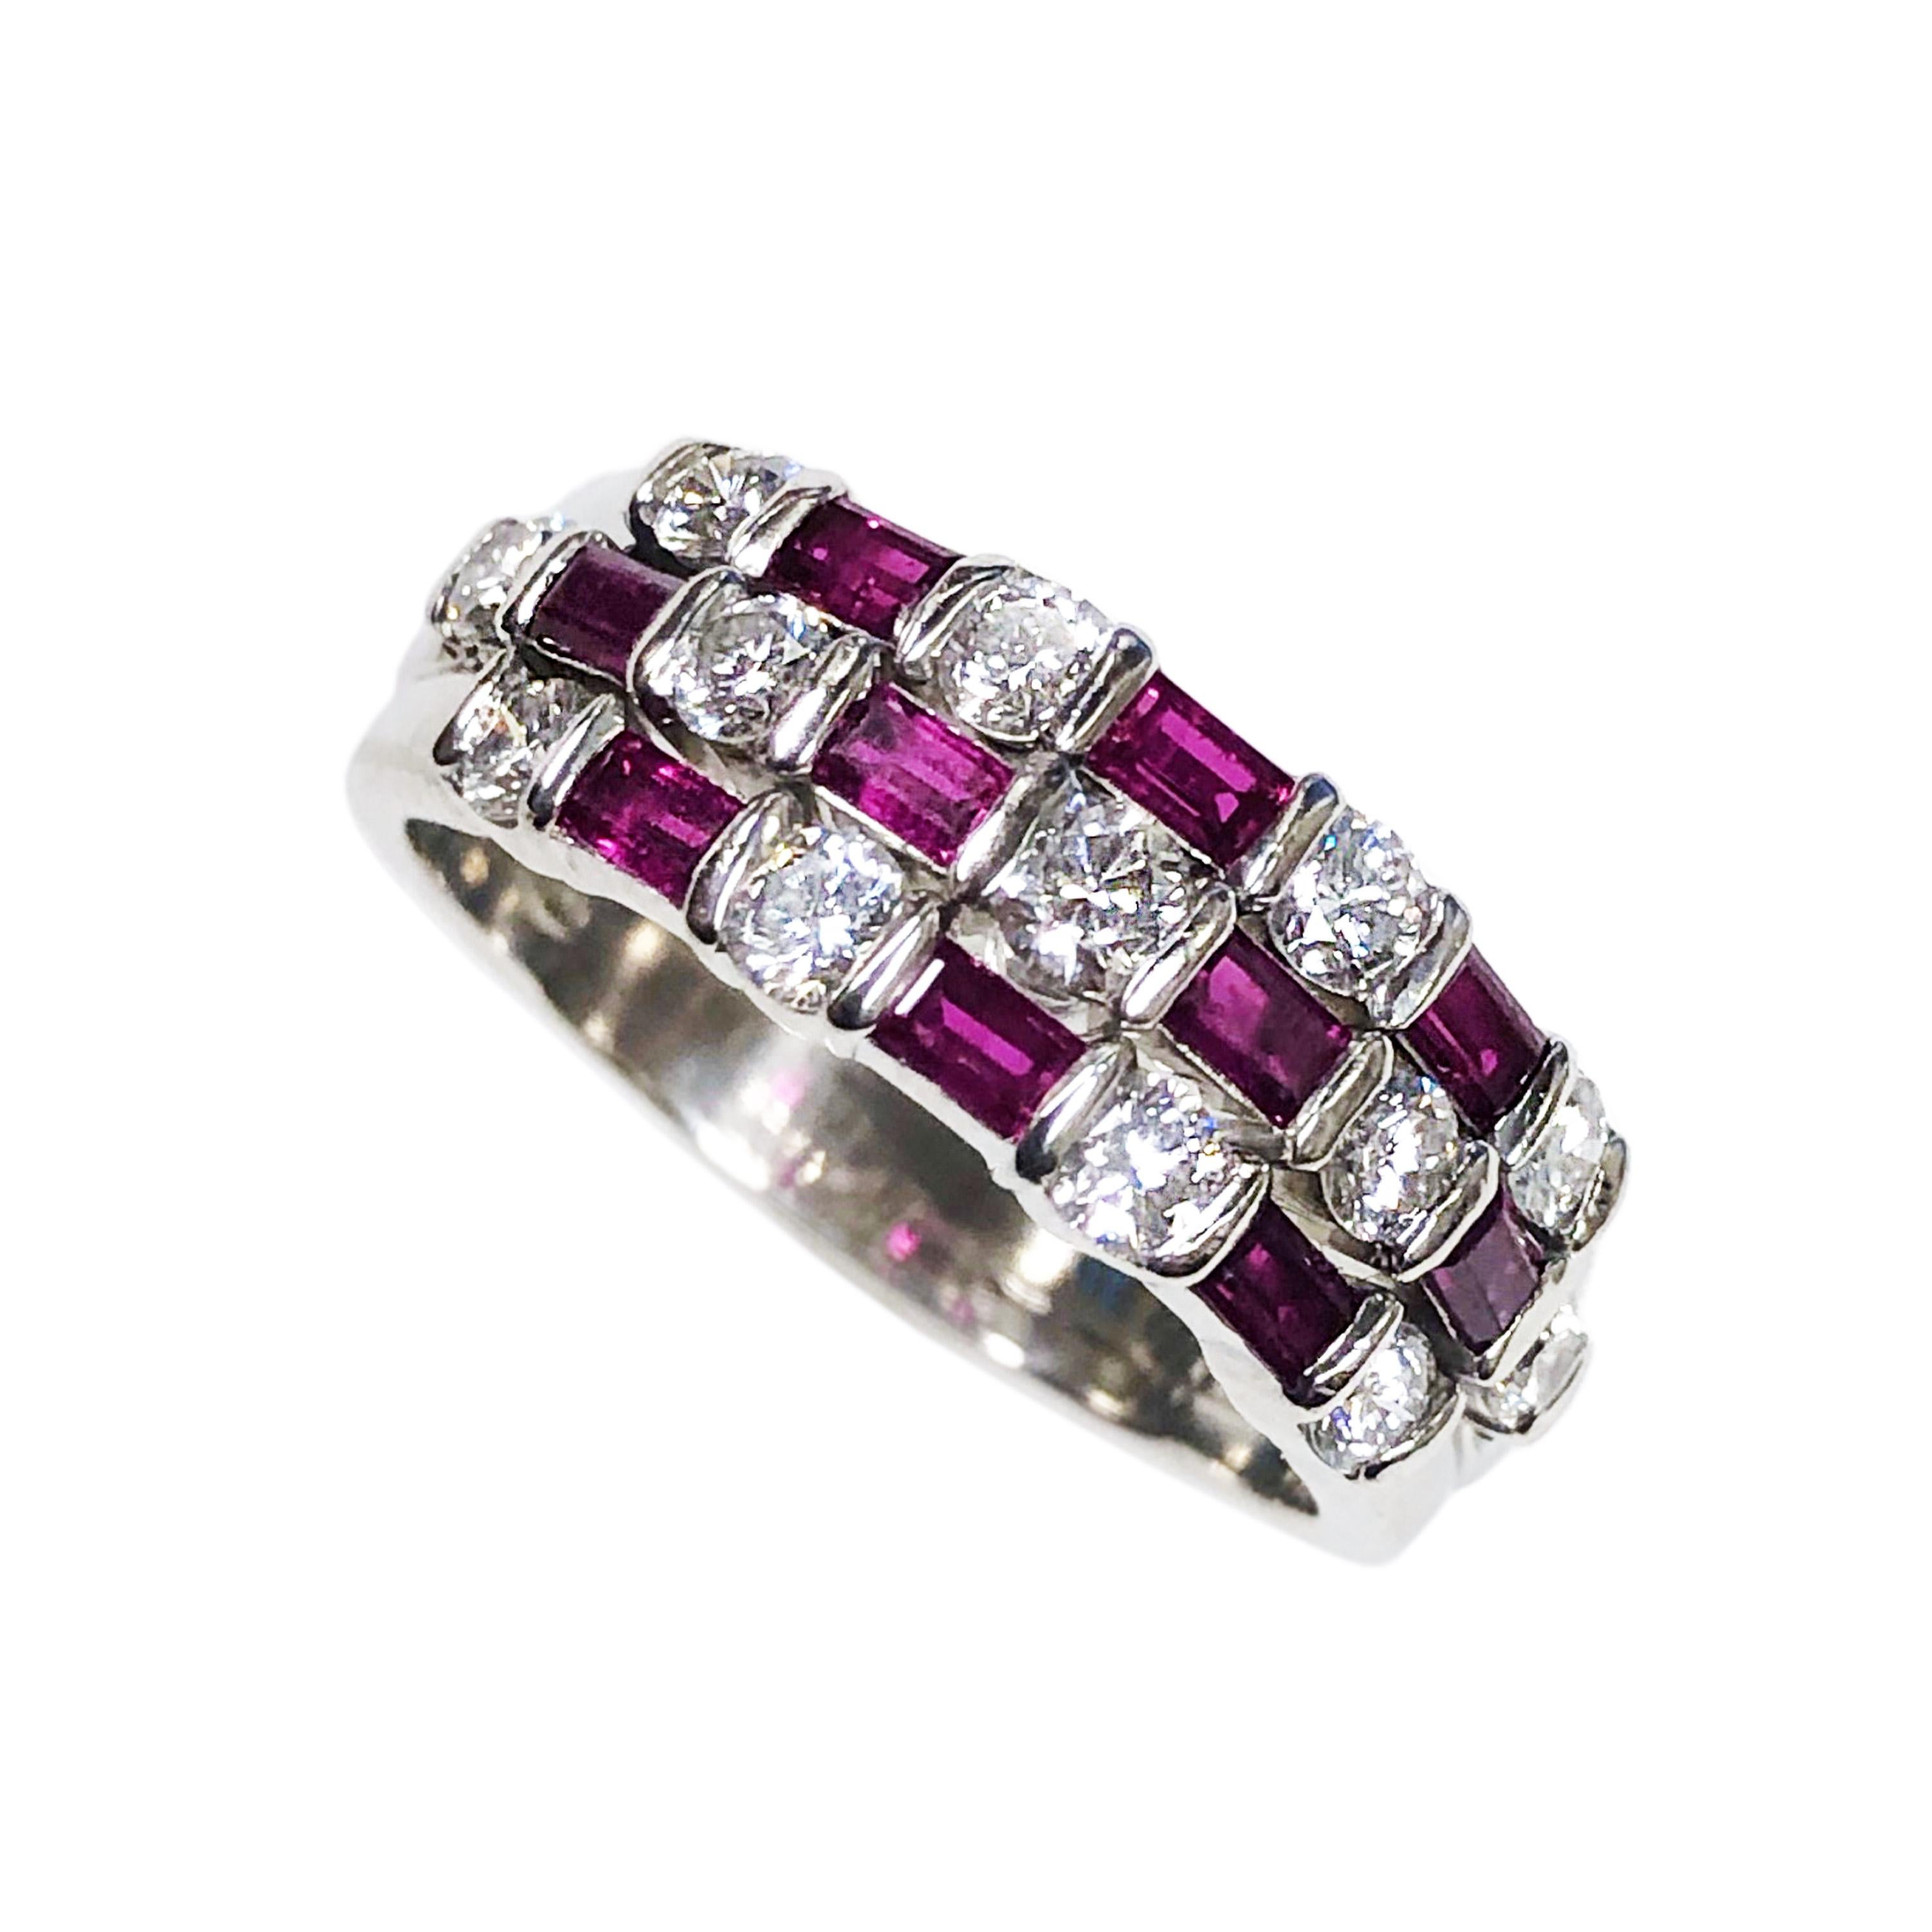 Circa 1990 Tiffany & company Platinum Ring, in the Dot Dash style created and made Famous by Oscar Heyman. This ring features Round Brilliant cut Diamonds totaling .55 Carat and very fine color Baguette Rubies. The top of the ring measures 3/4 inch